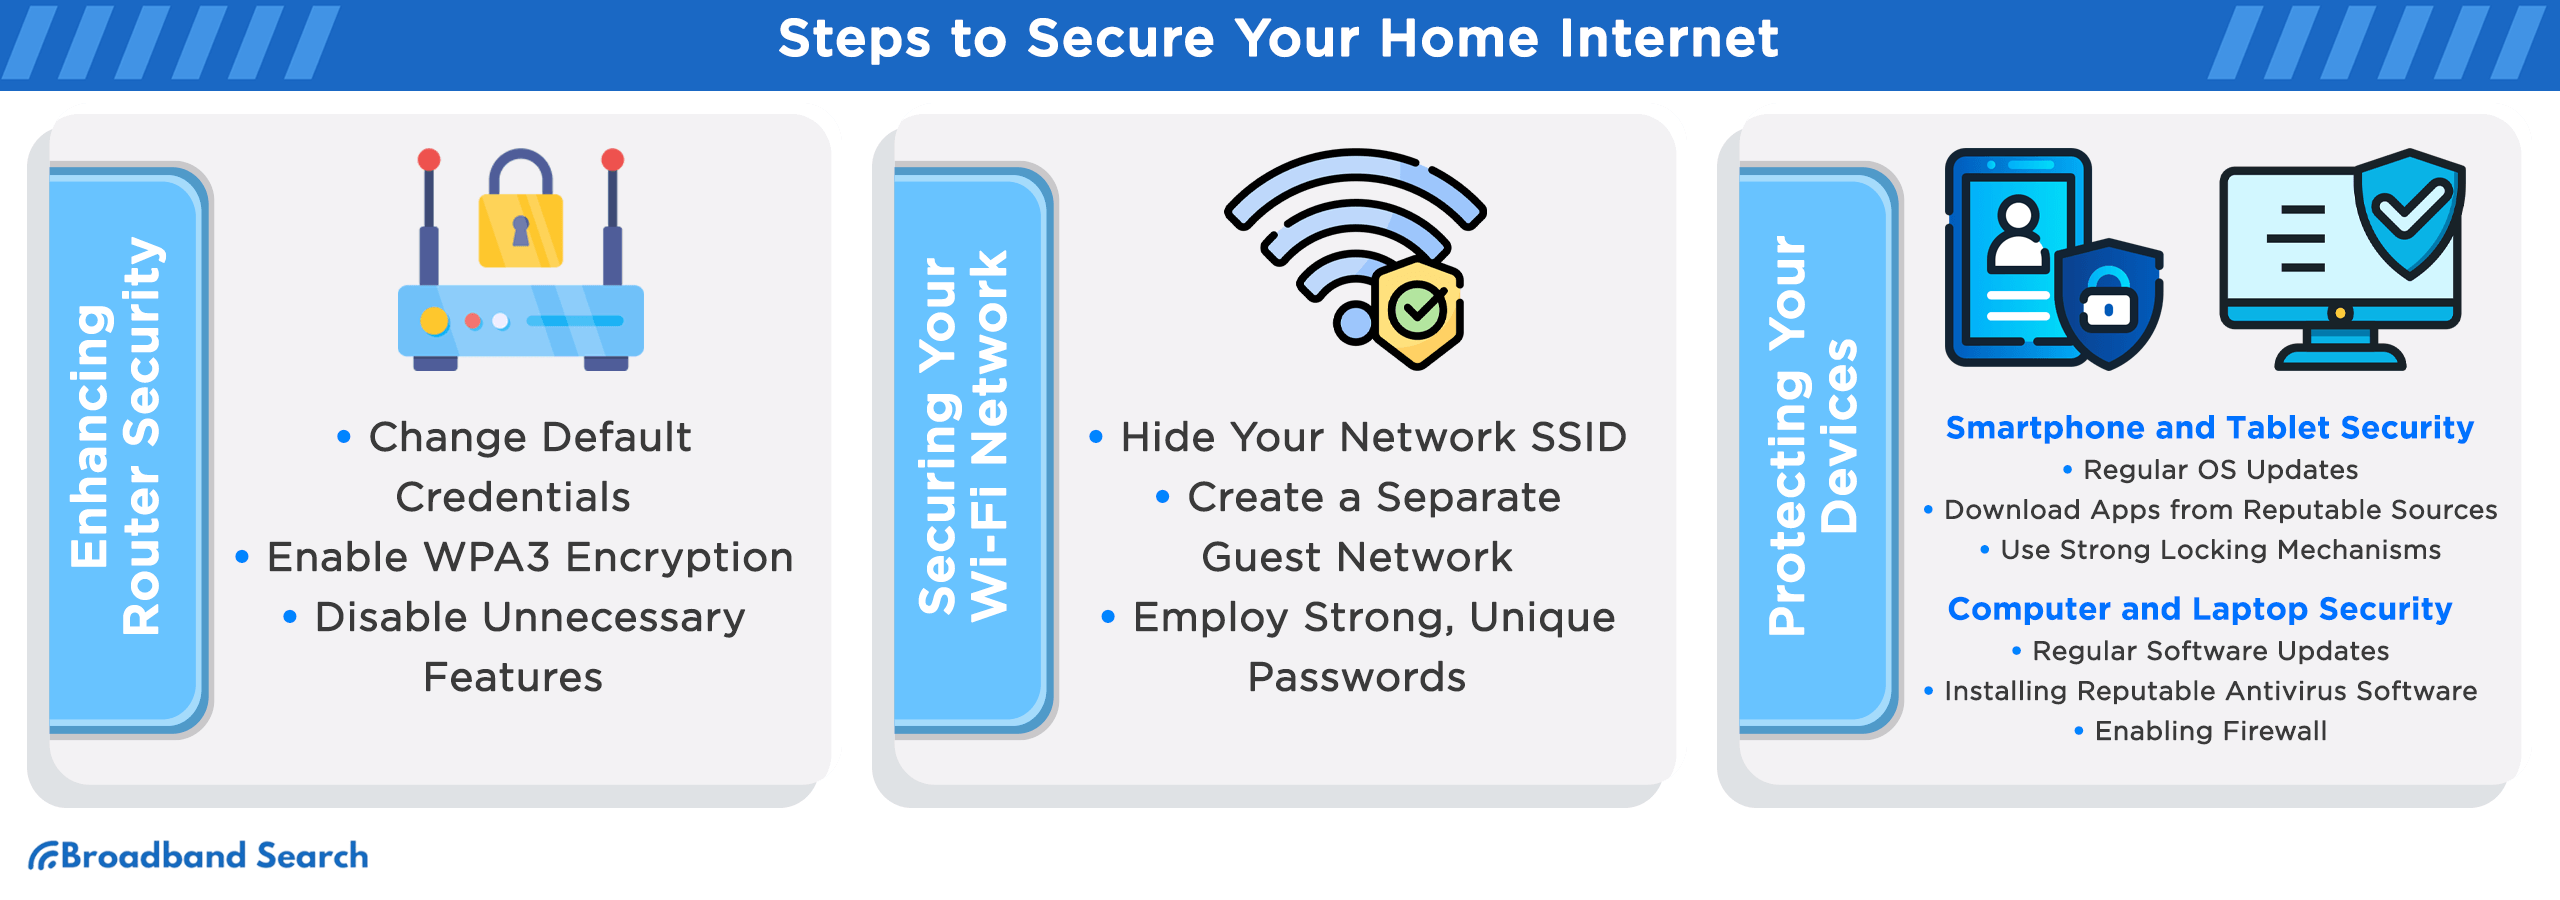 Steps to secure your home internet